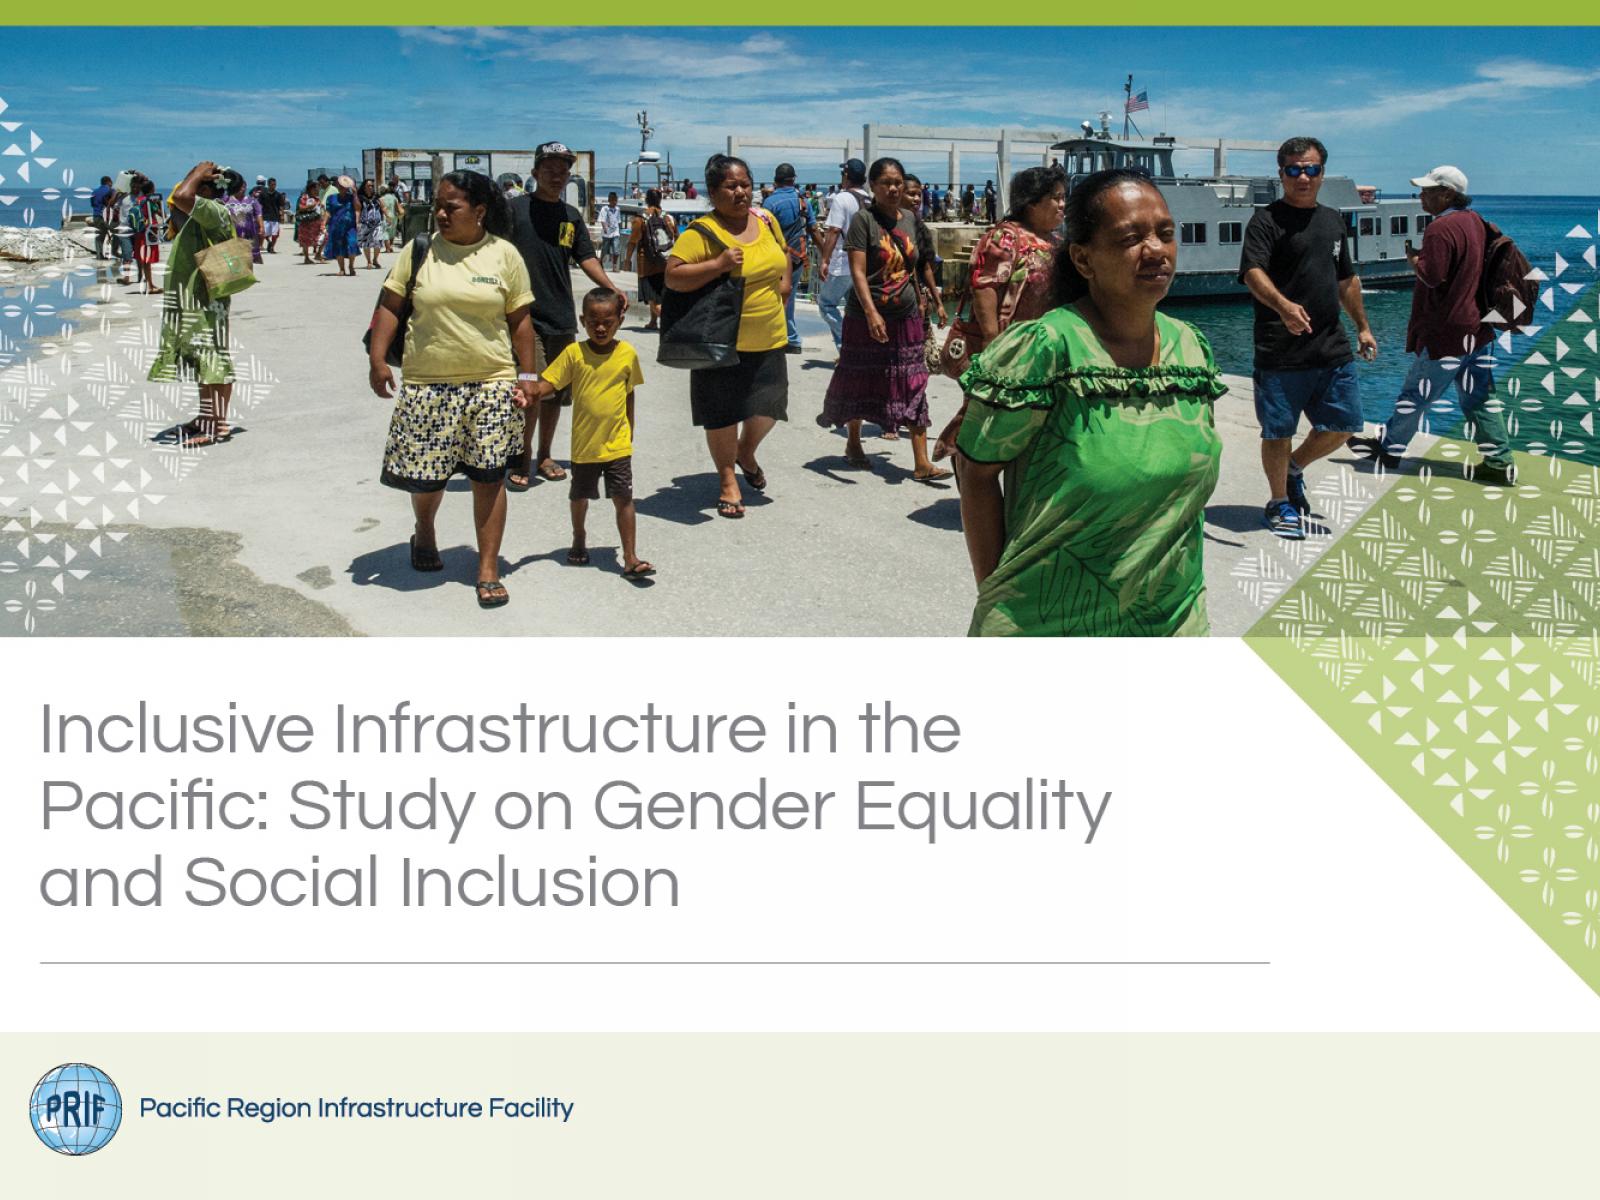 Gender Equality and Social Inclusion 